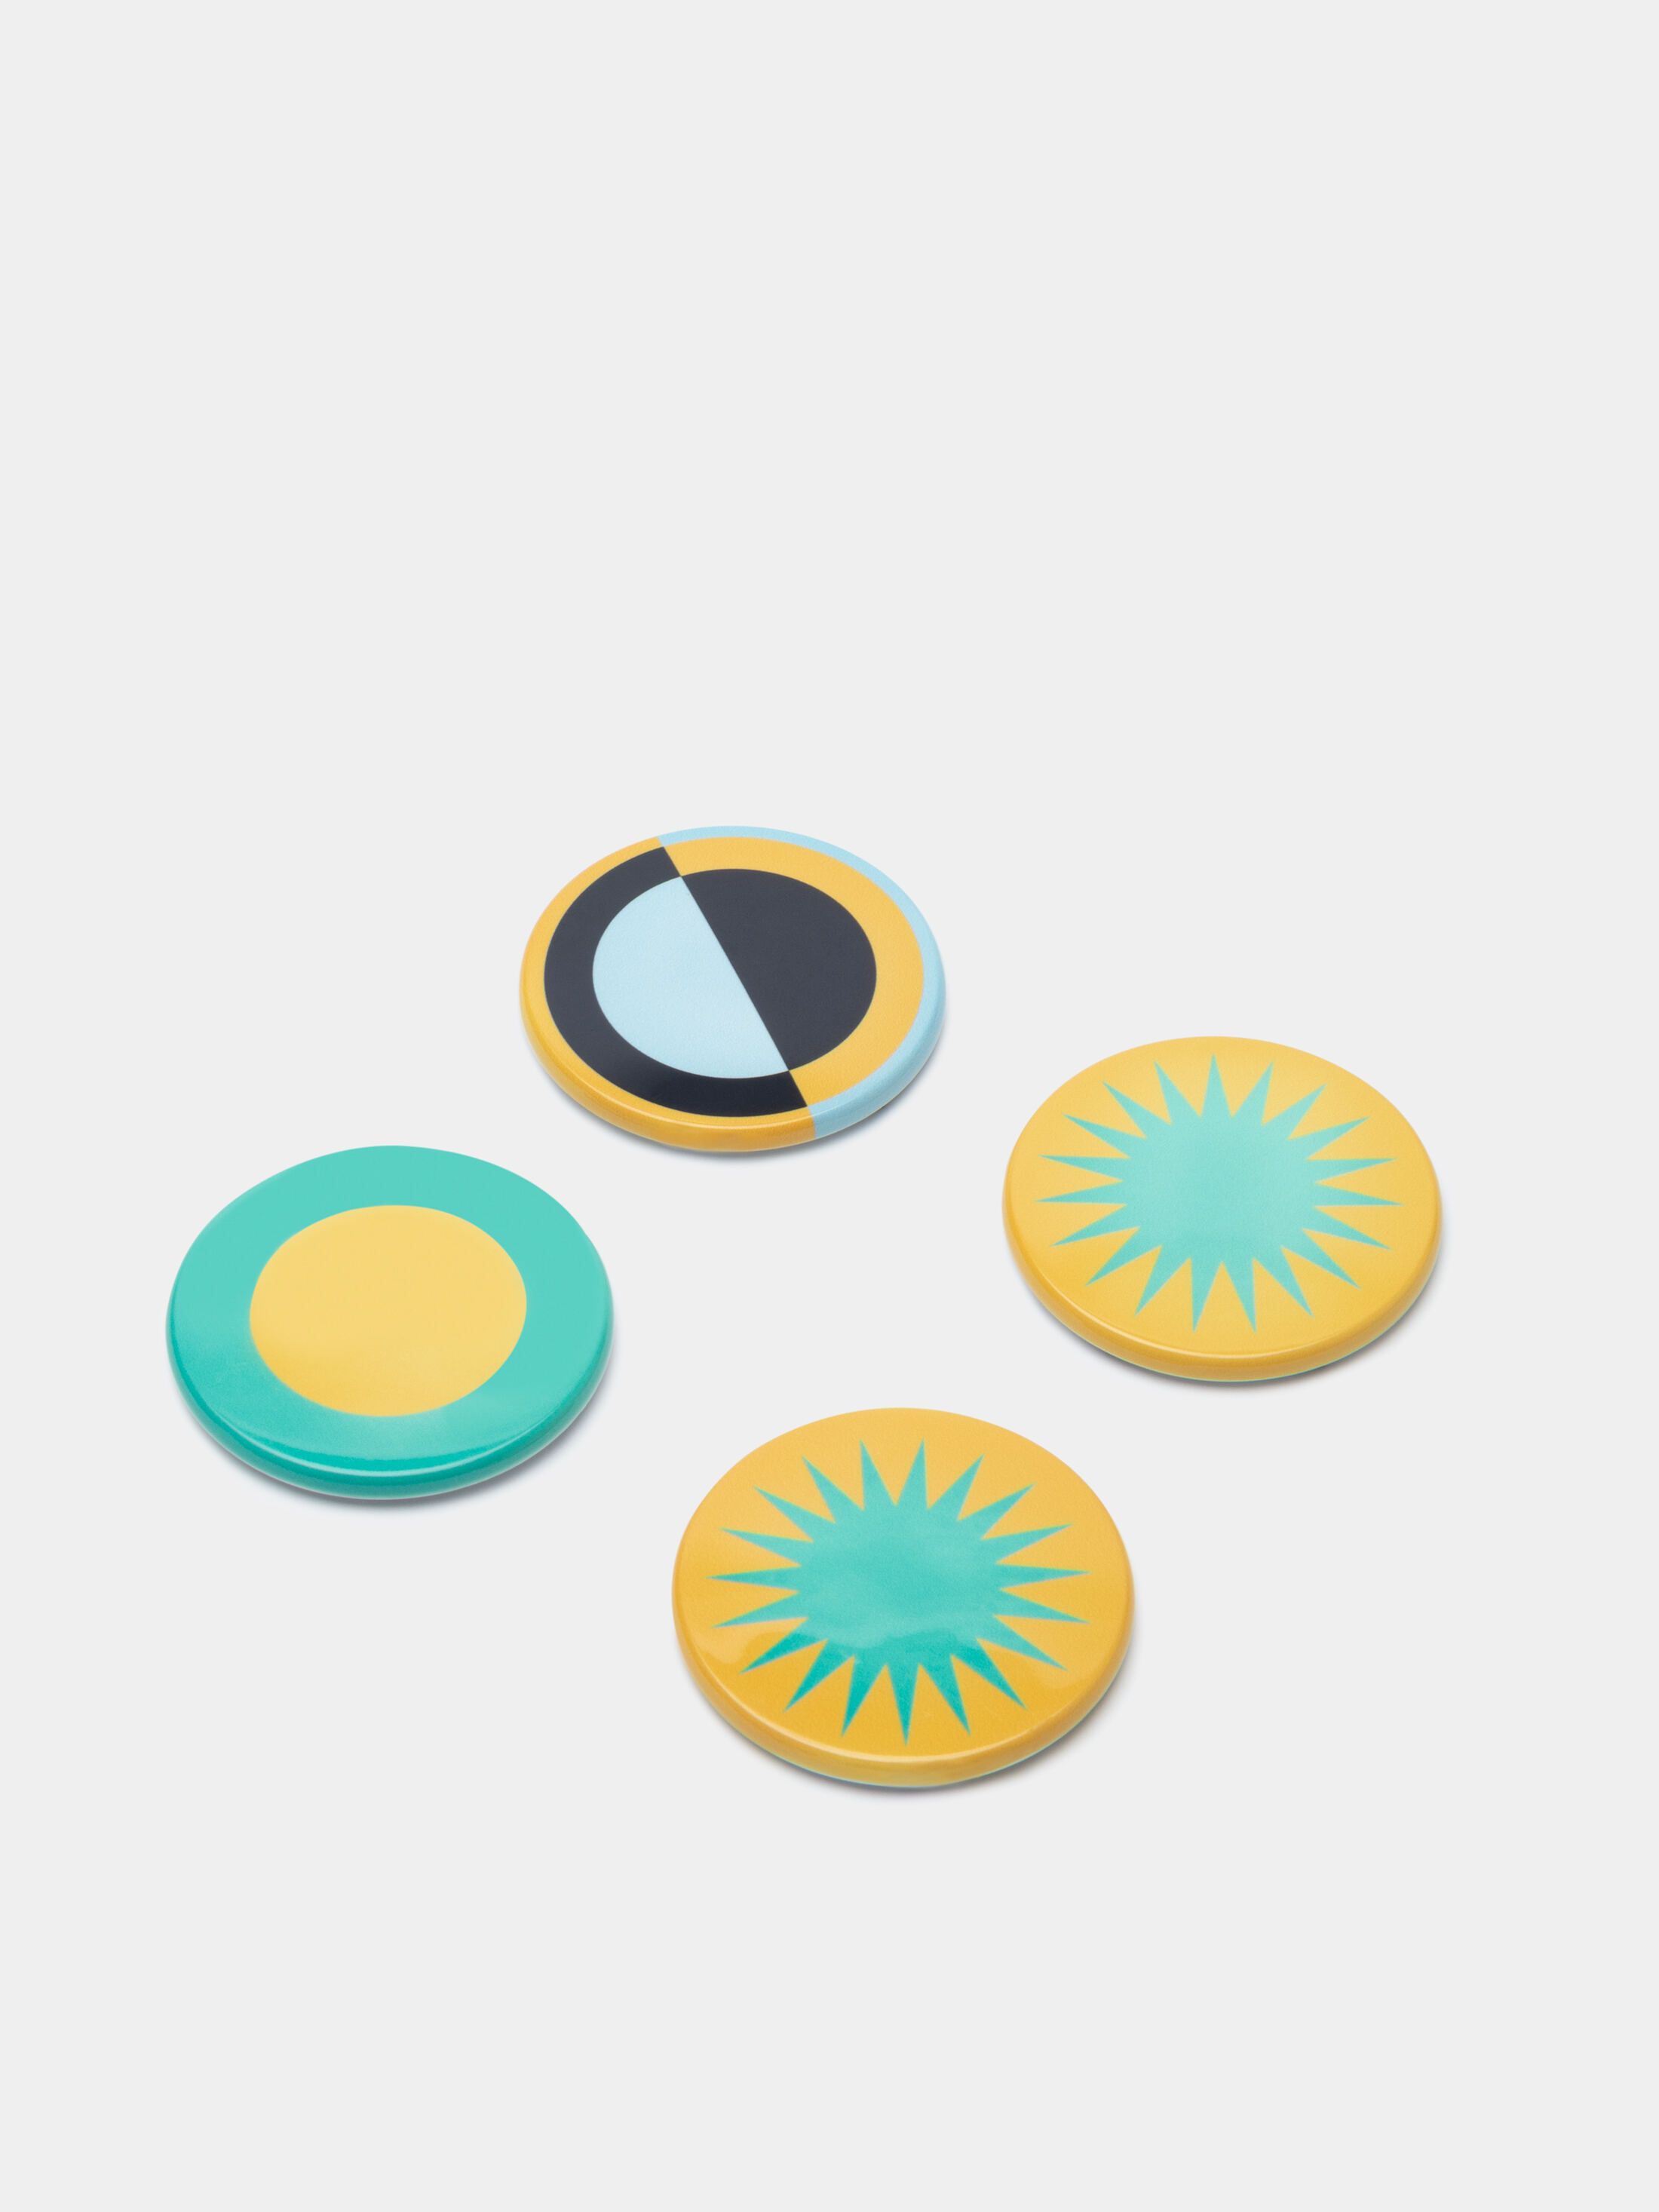 circle printed magnets with illustration design